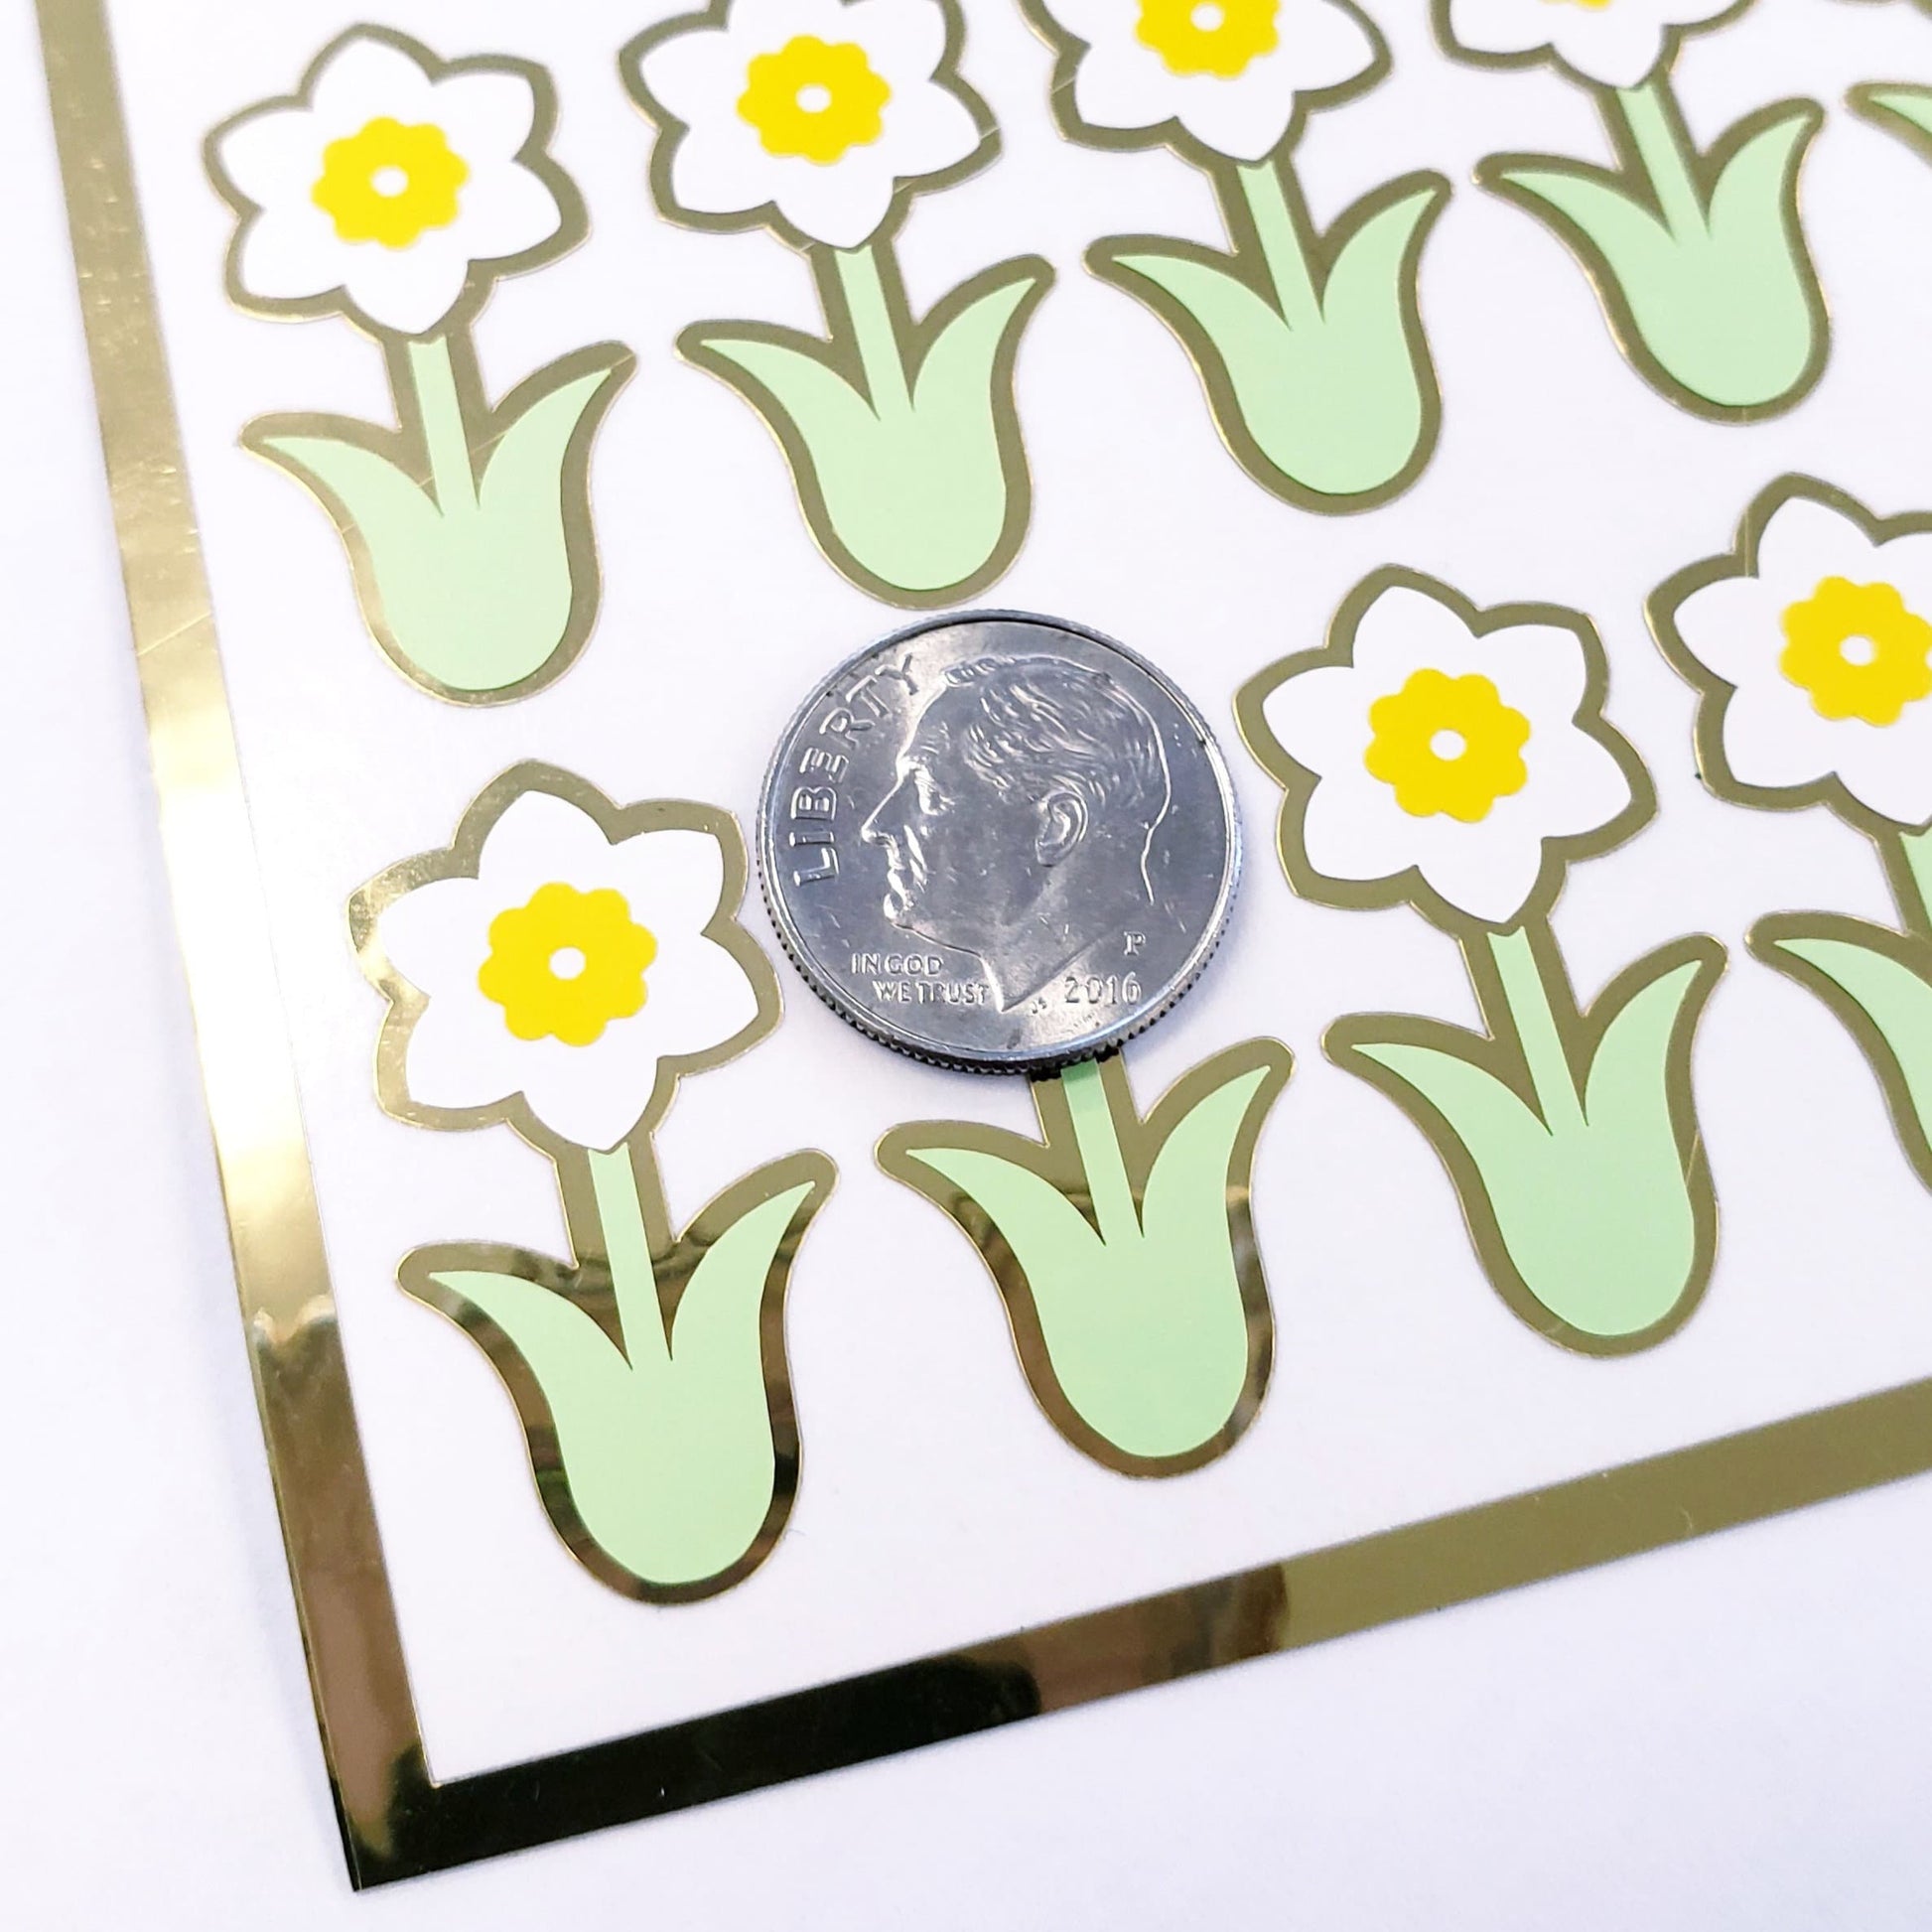 Daffodil Stickers, set of 35 flower decals for Easter, Mother's Day, Spring weddings, sticker gift for gardeners, waterproof peel and stick.